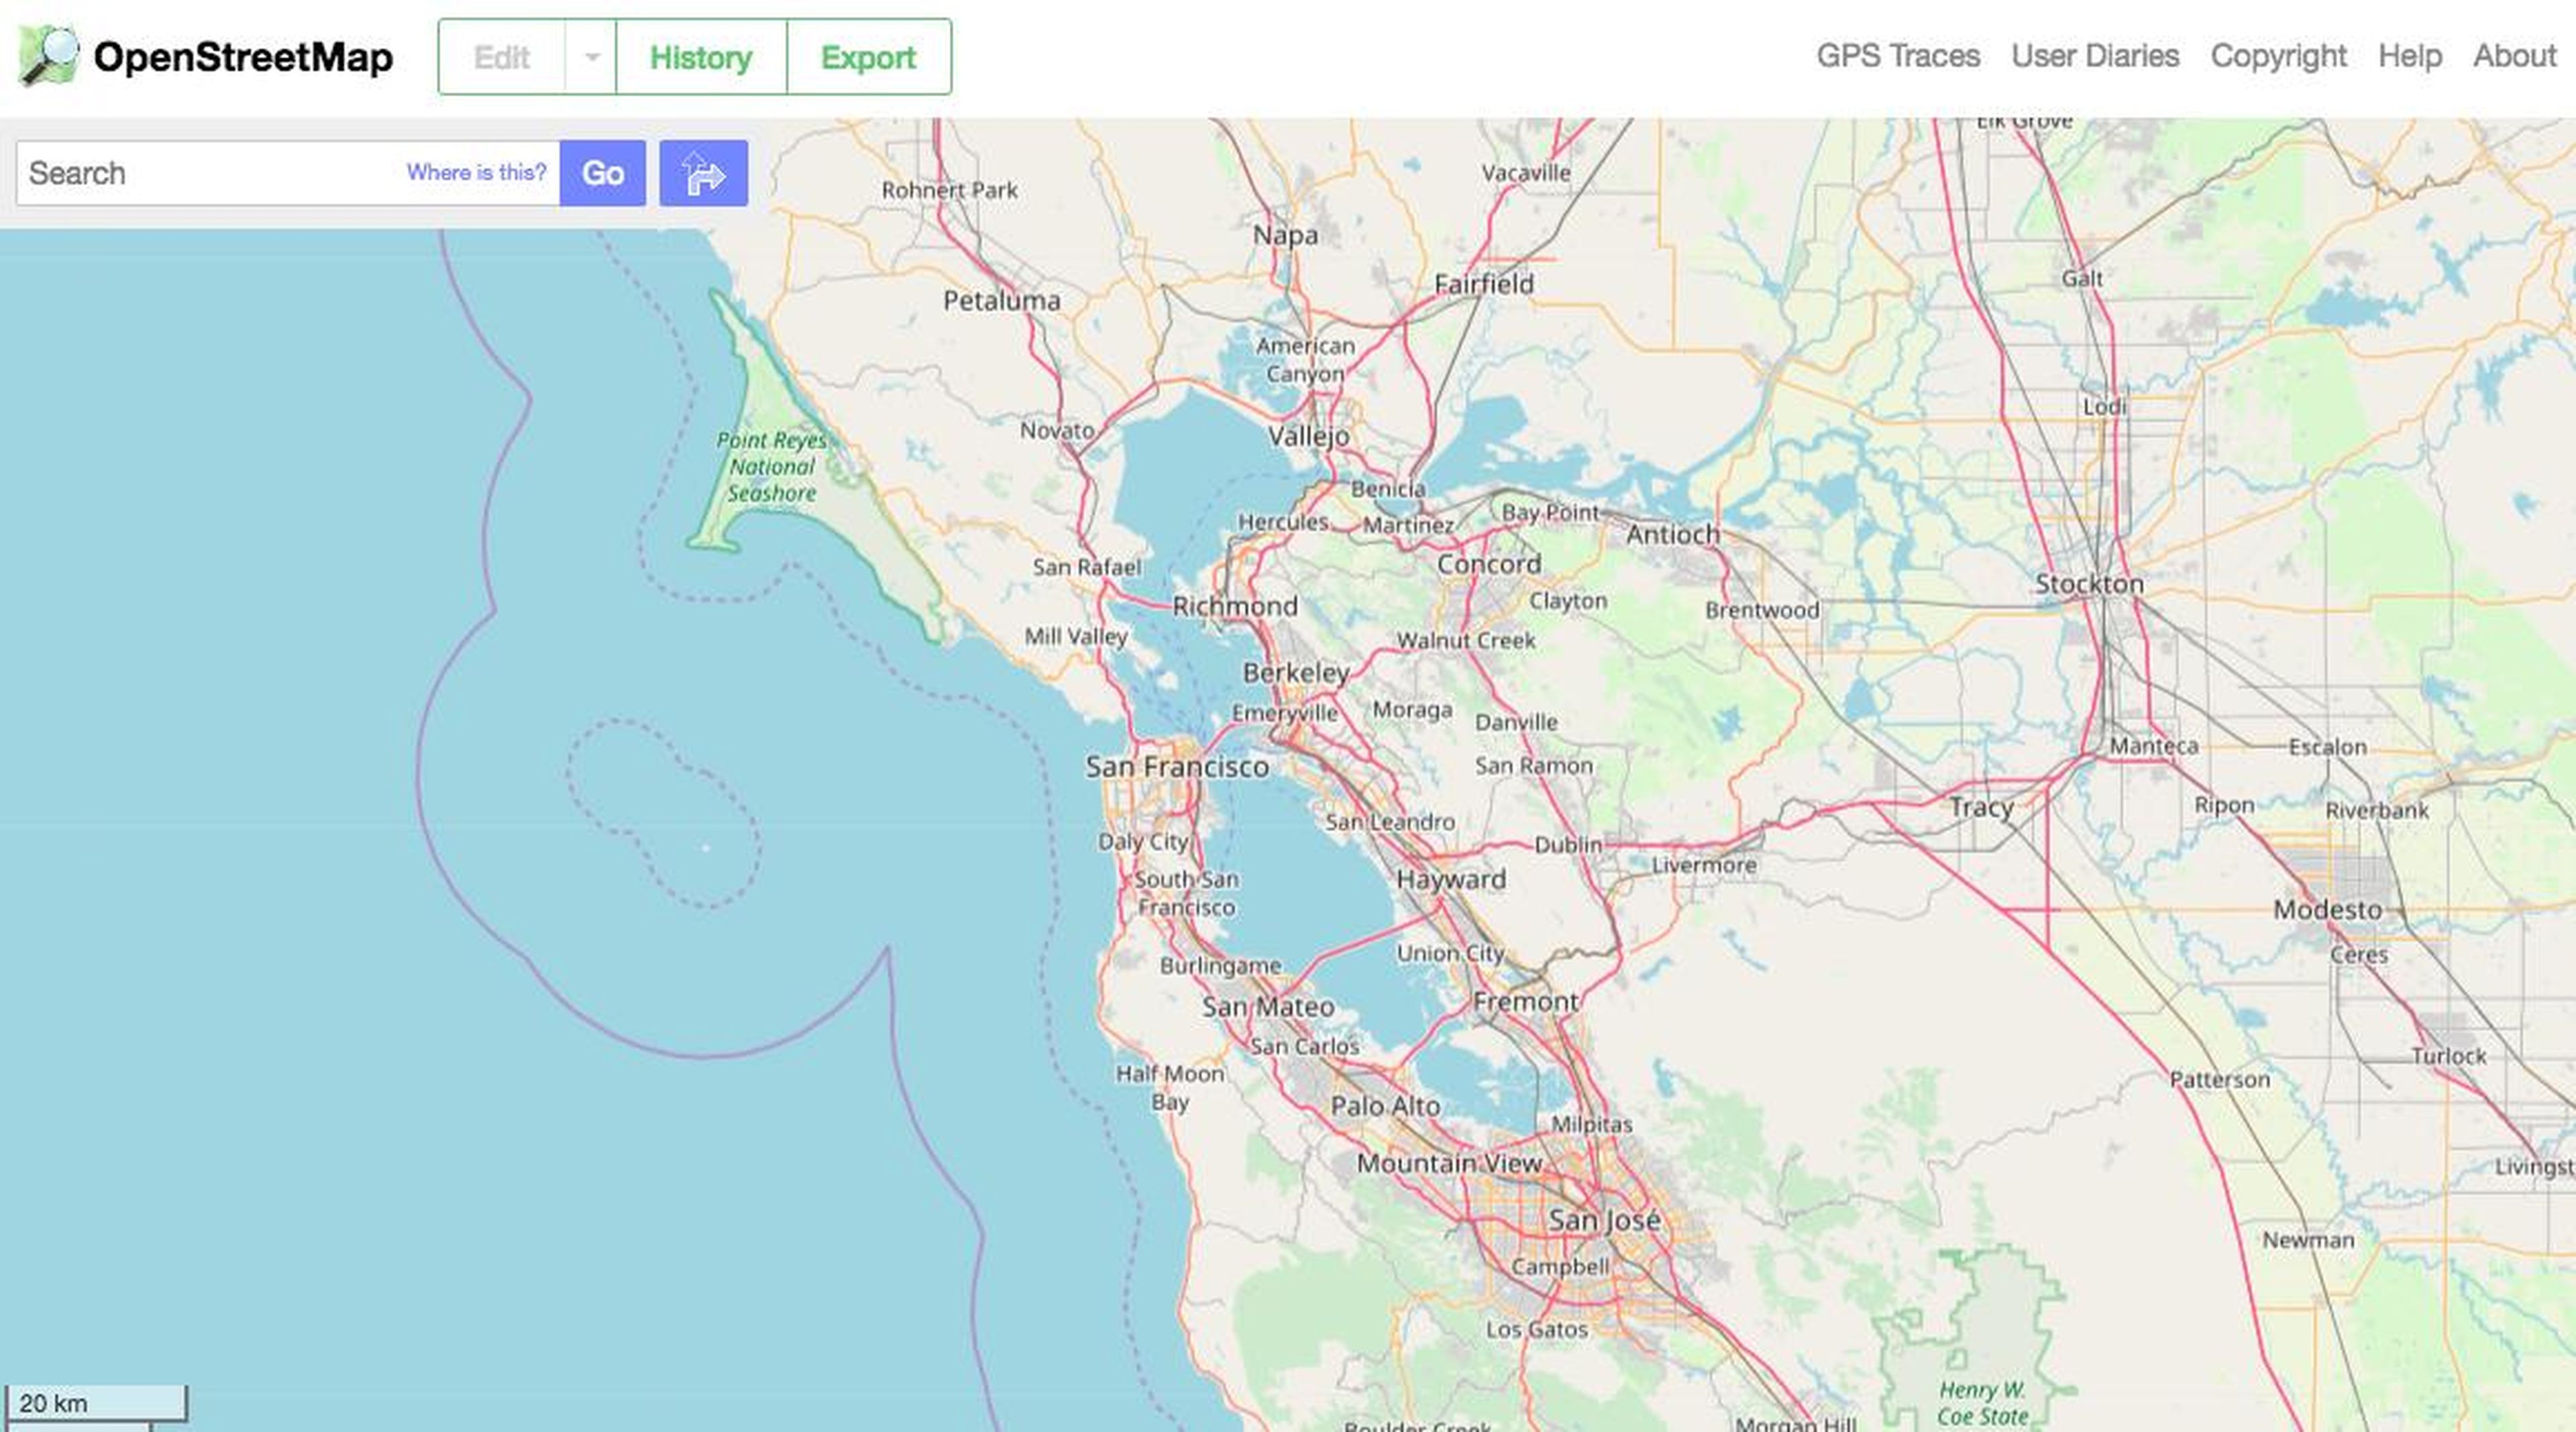 For directions, try OpenStreetMap over Google Maps.